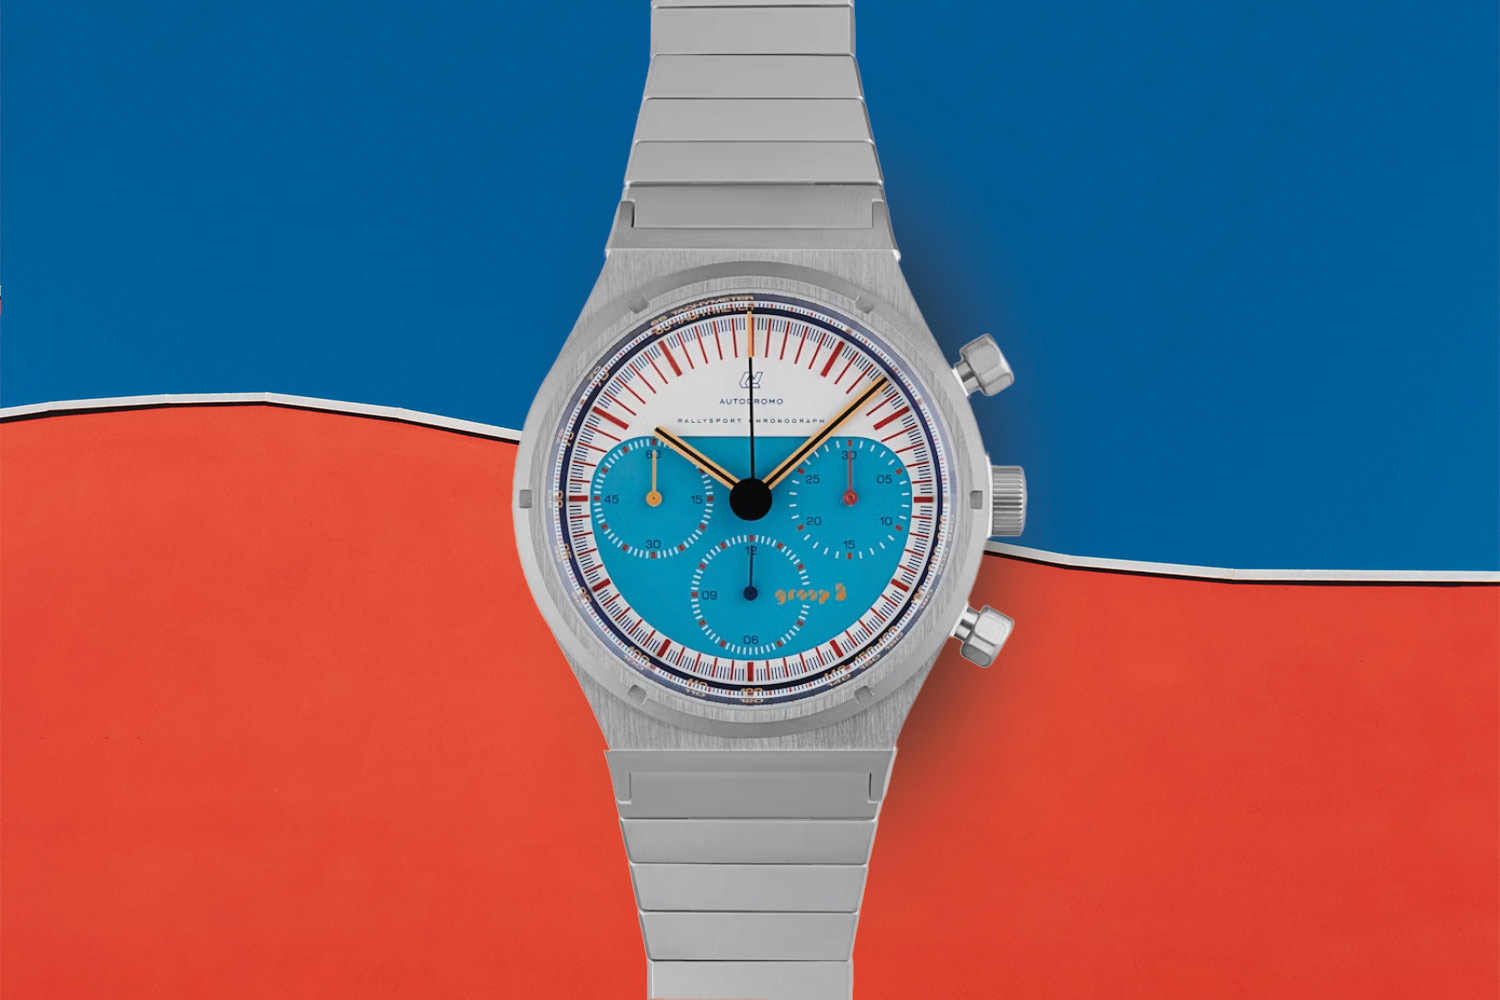 Gray, white and blue watch